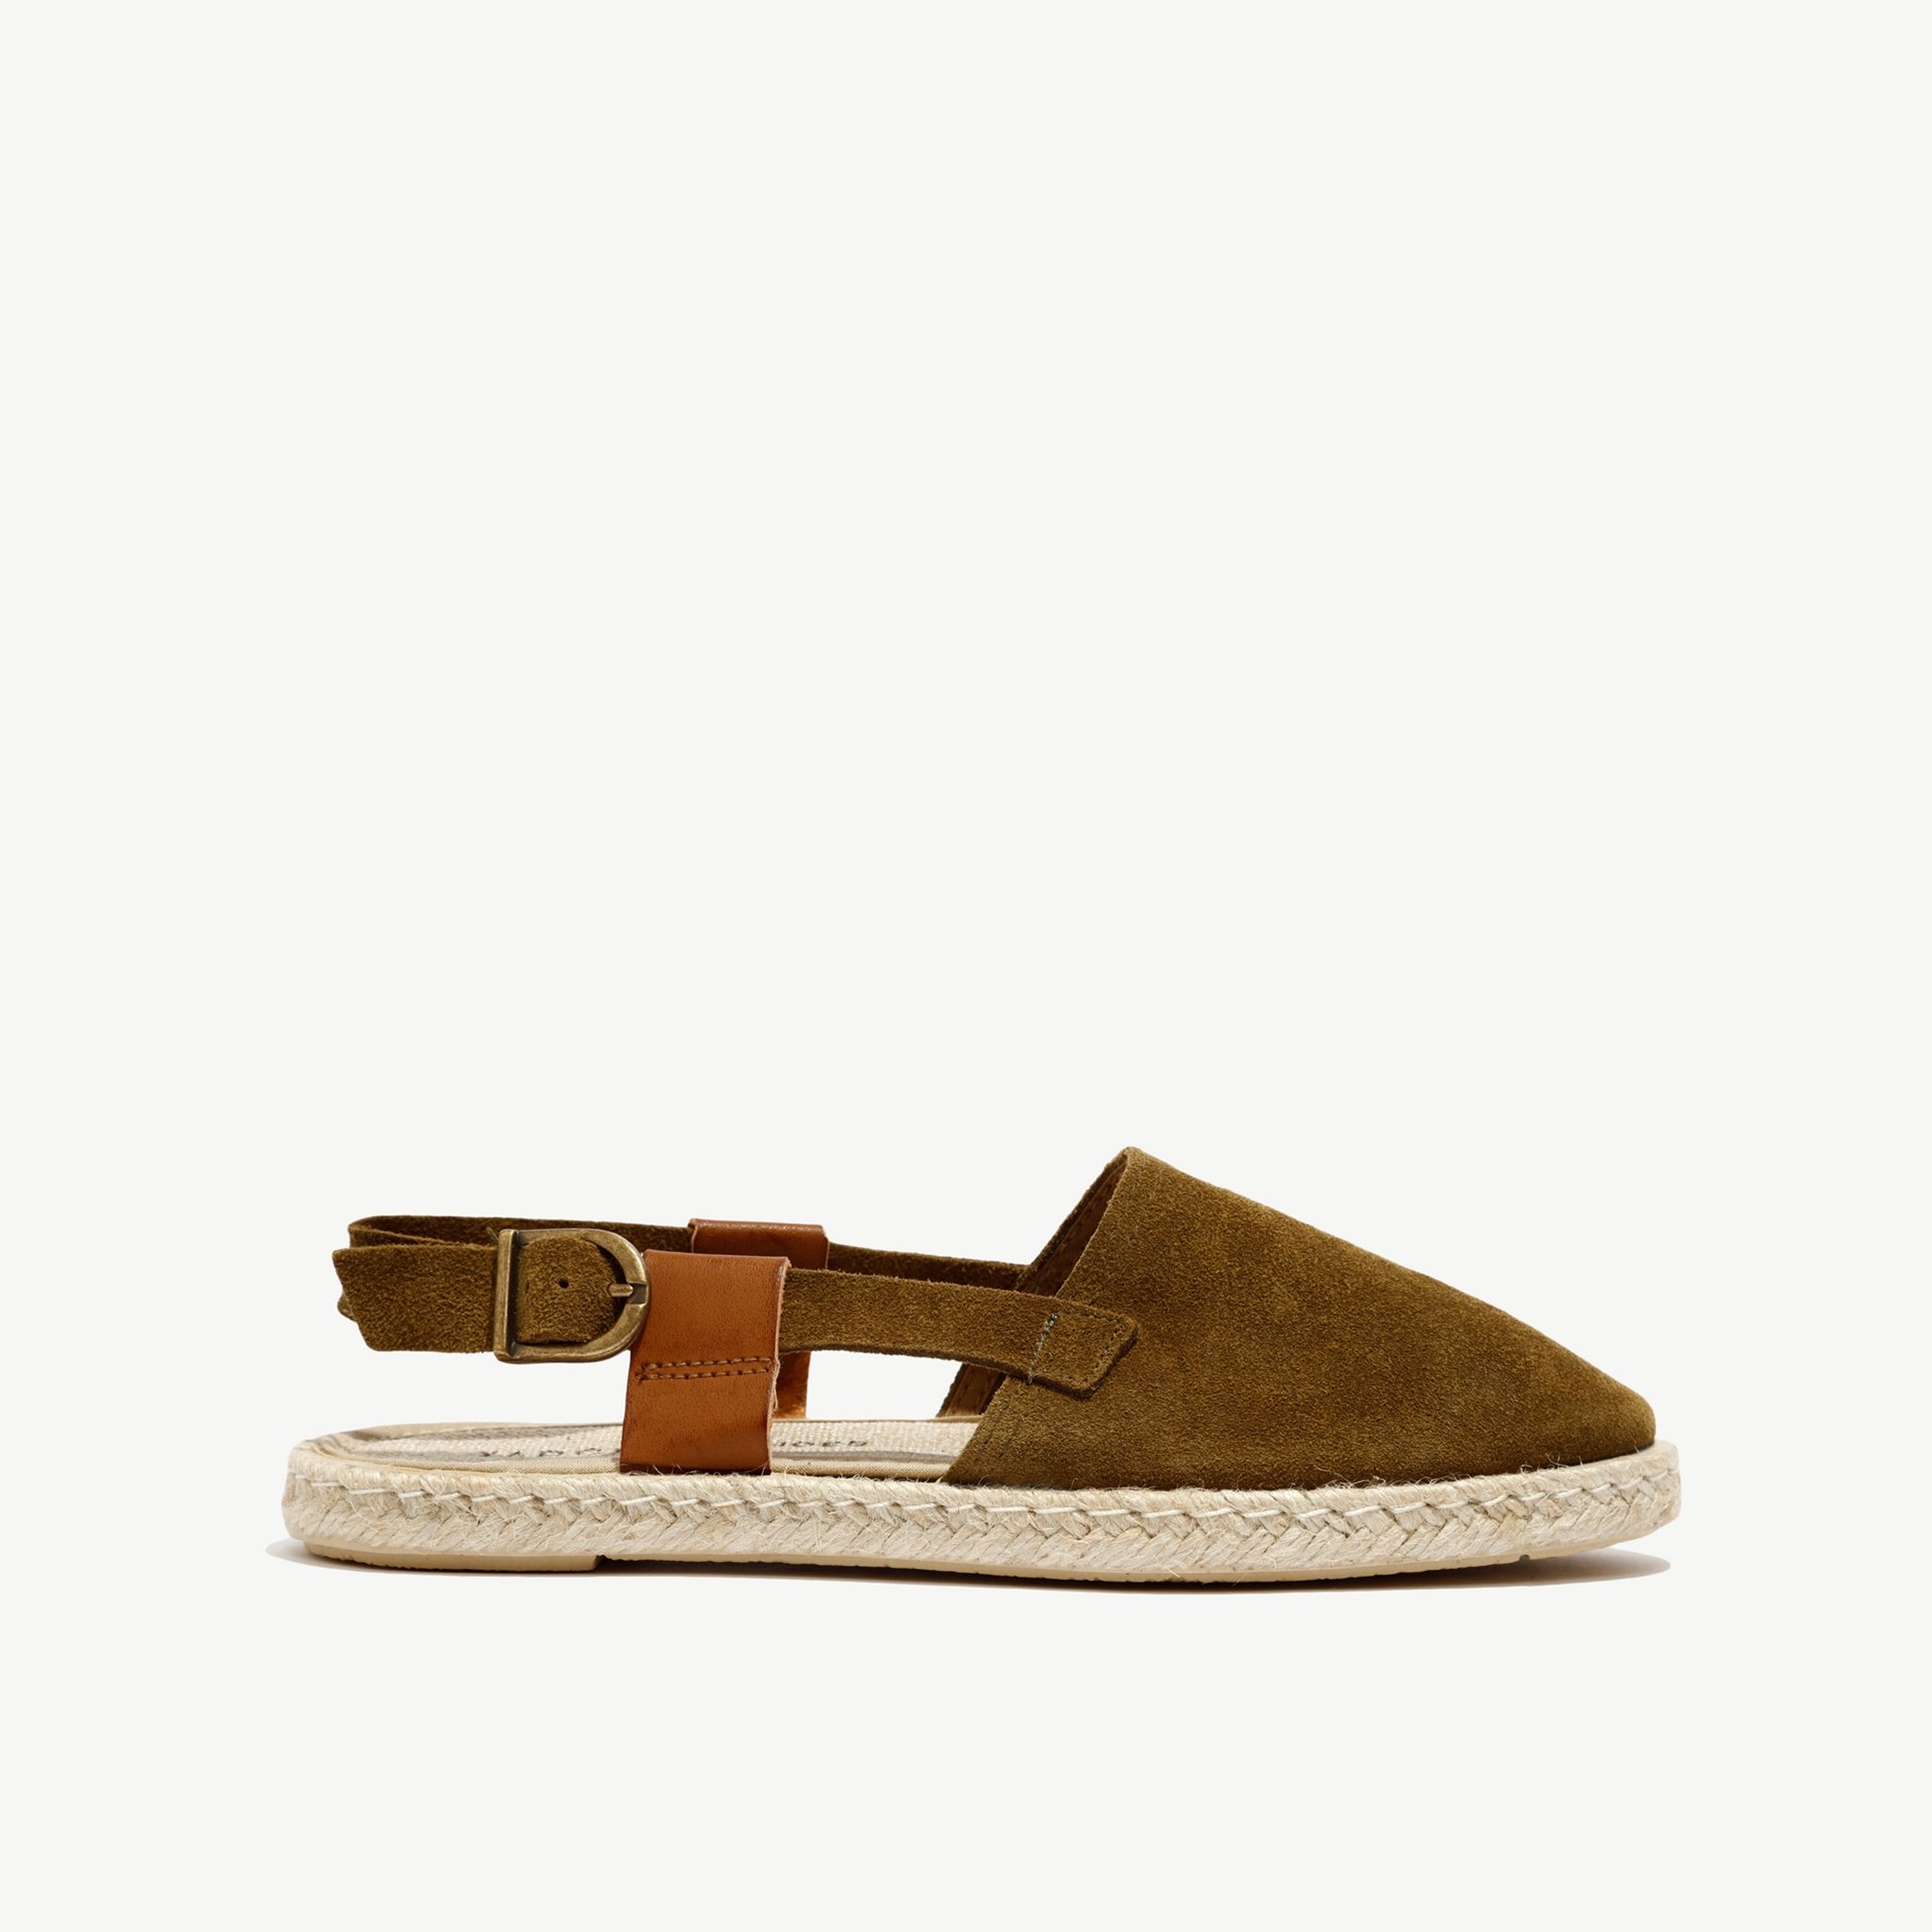 Green Suede Leather Espadrilles